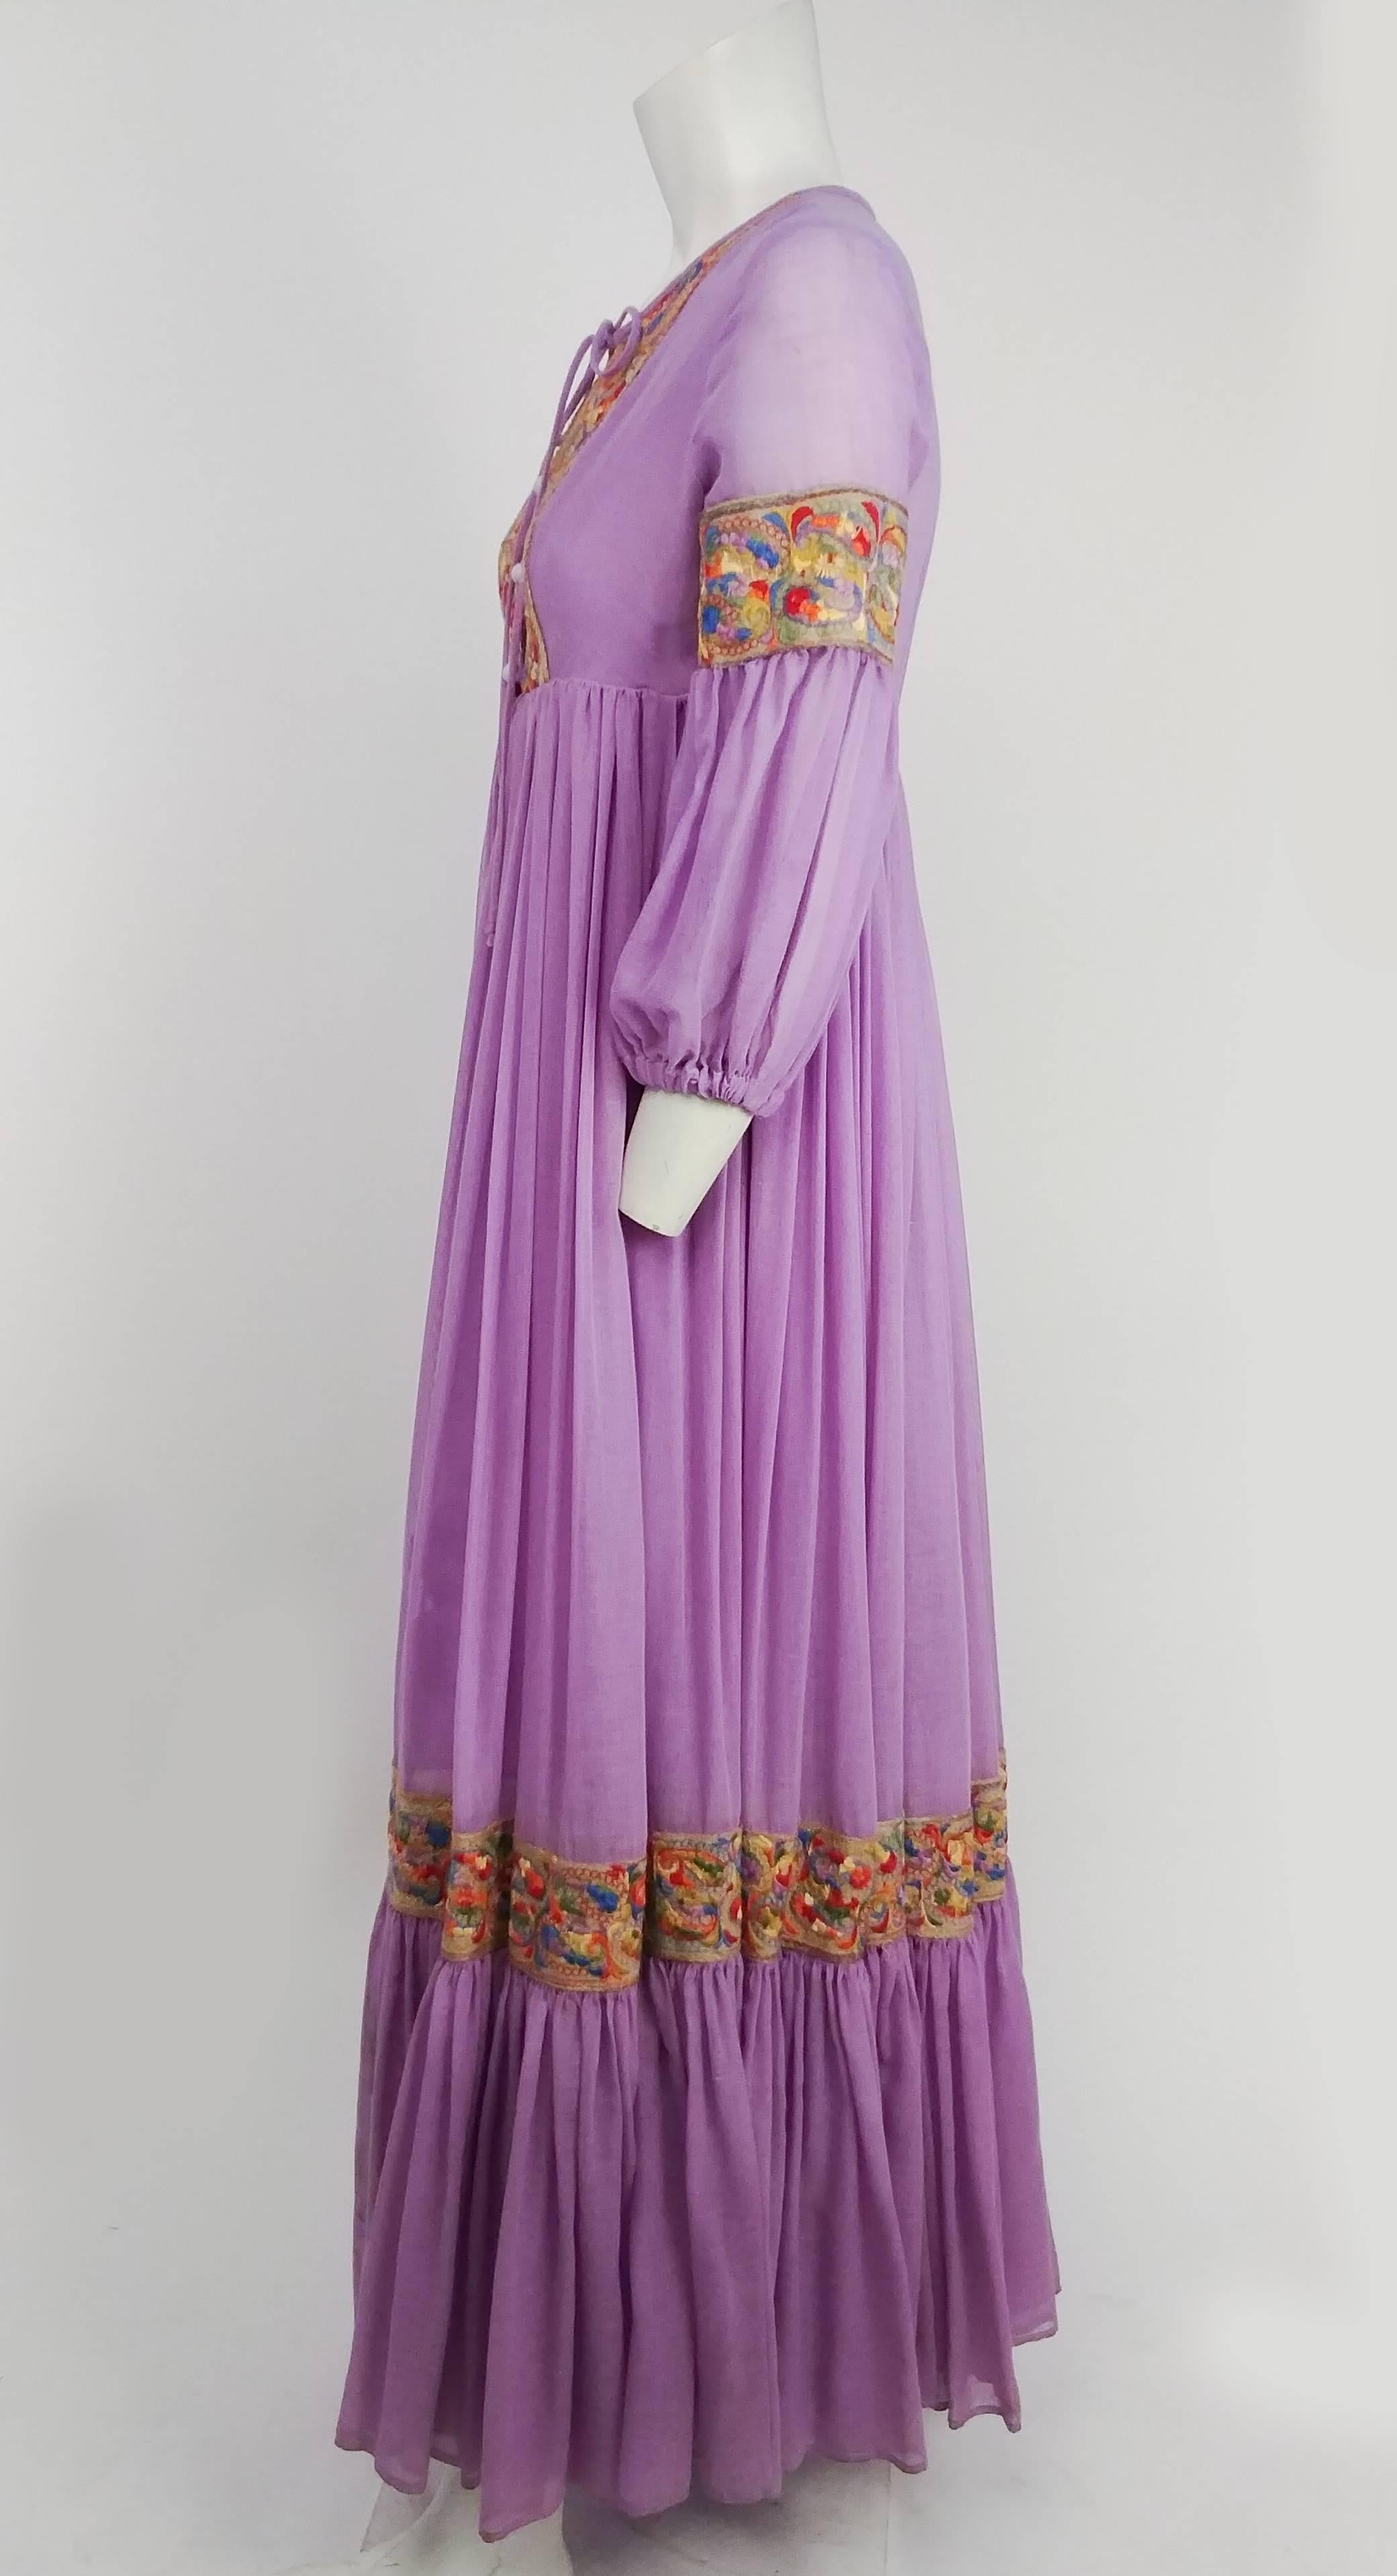 1960s Lavender Boho Maxi Dress w/ Embroidered Ribbon Trim. Full length gathered skirt. Partially buttons up front, ties at front collar. 